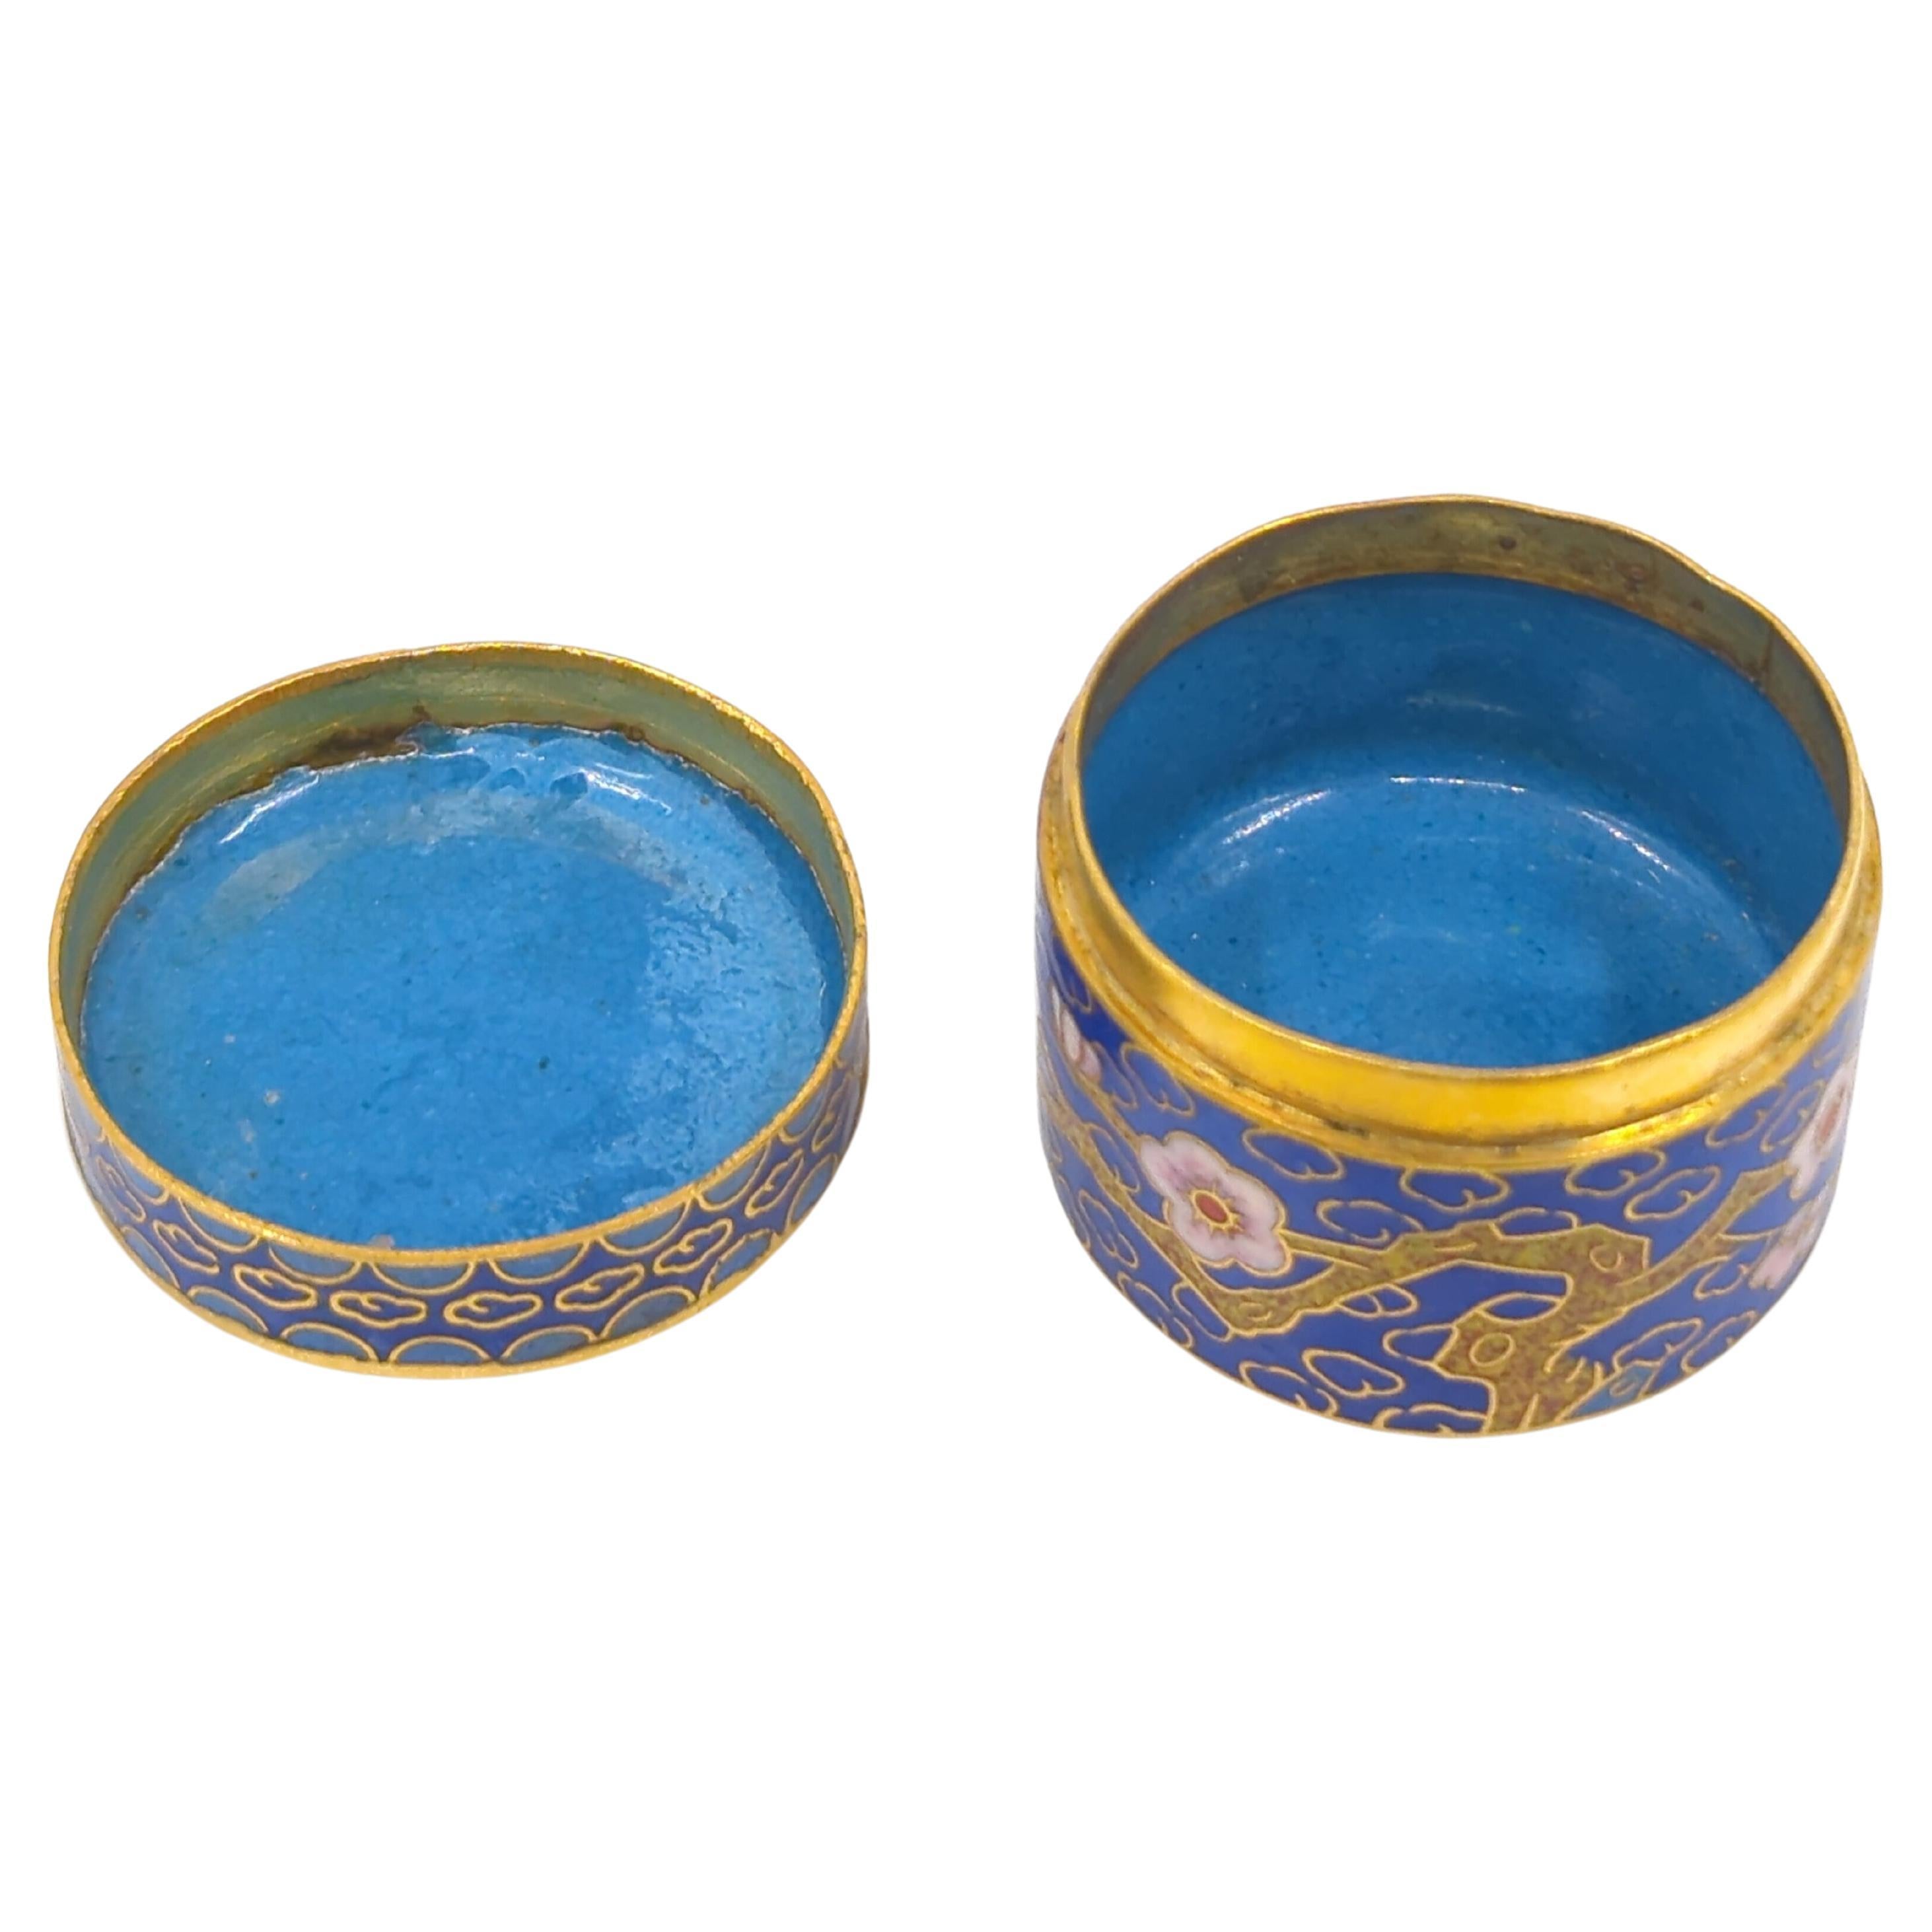 Antique Chinese cloisonne enamelled covered small round box, on sacrificial blue ground and finely decorated with colorful, lively prunus blossoms on branches, interior and bottom enamelled in powder blue and with gilt gold details

This wonderfully